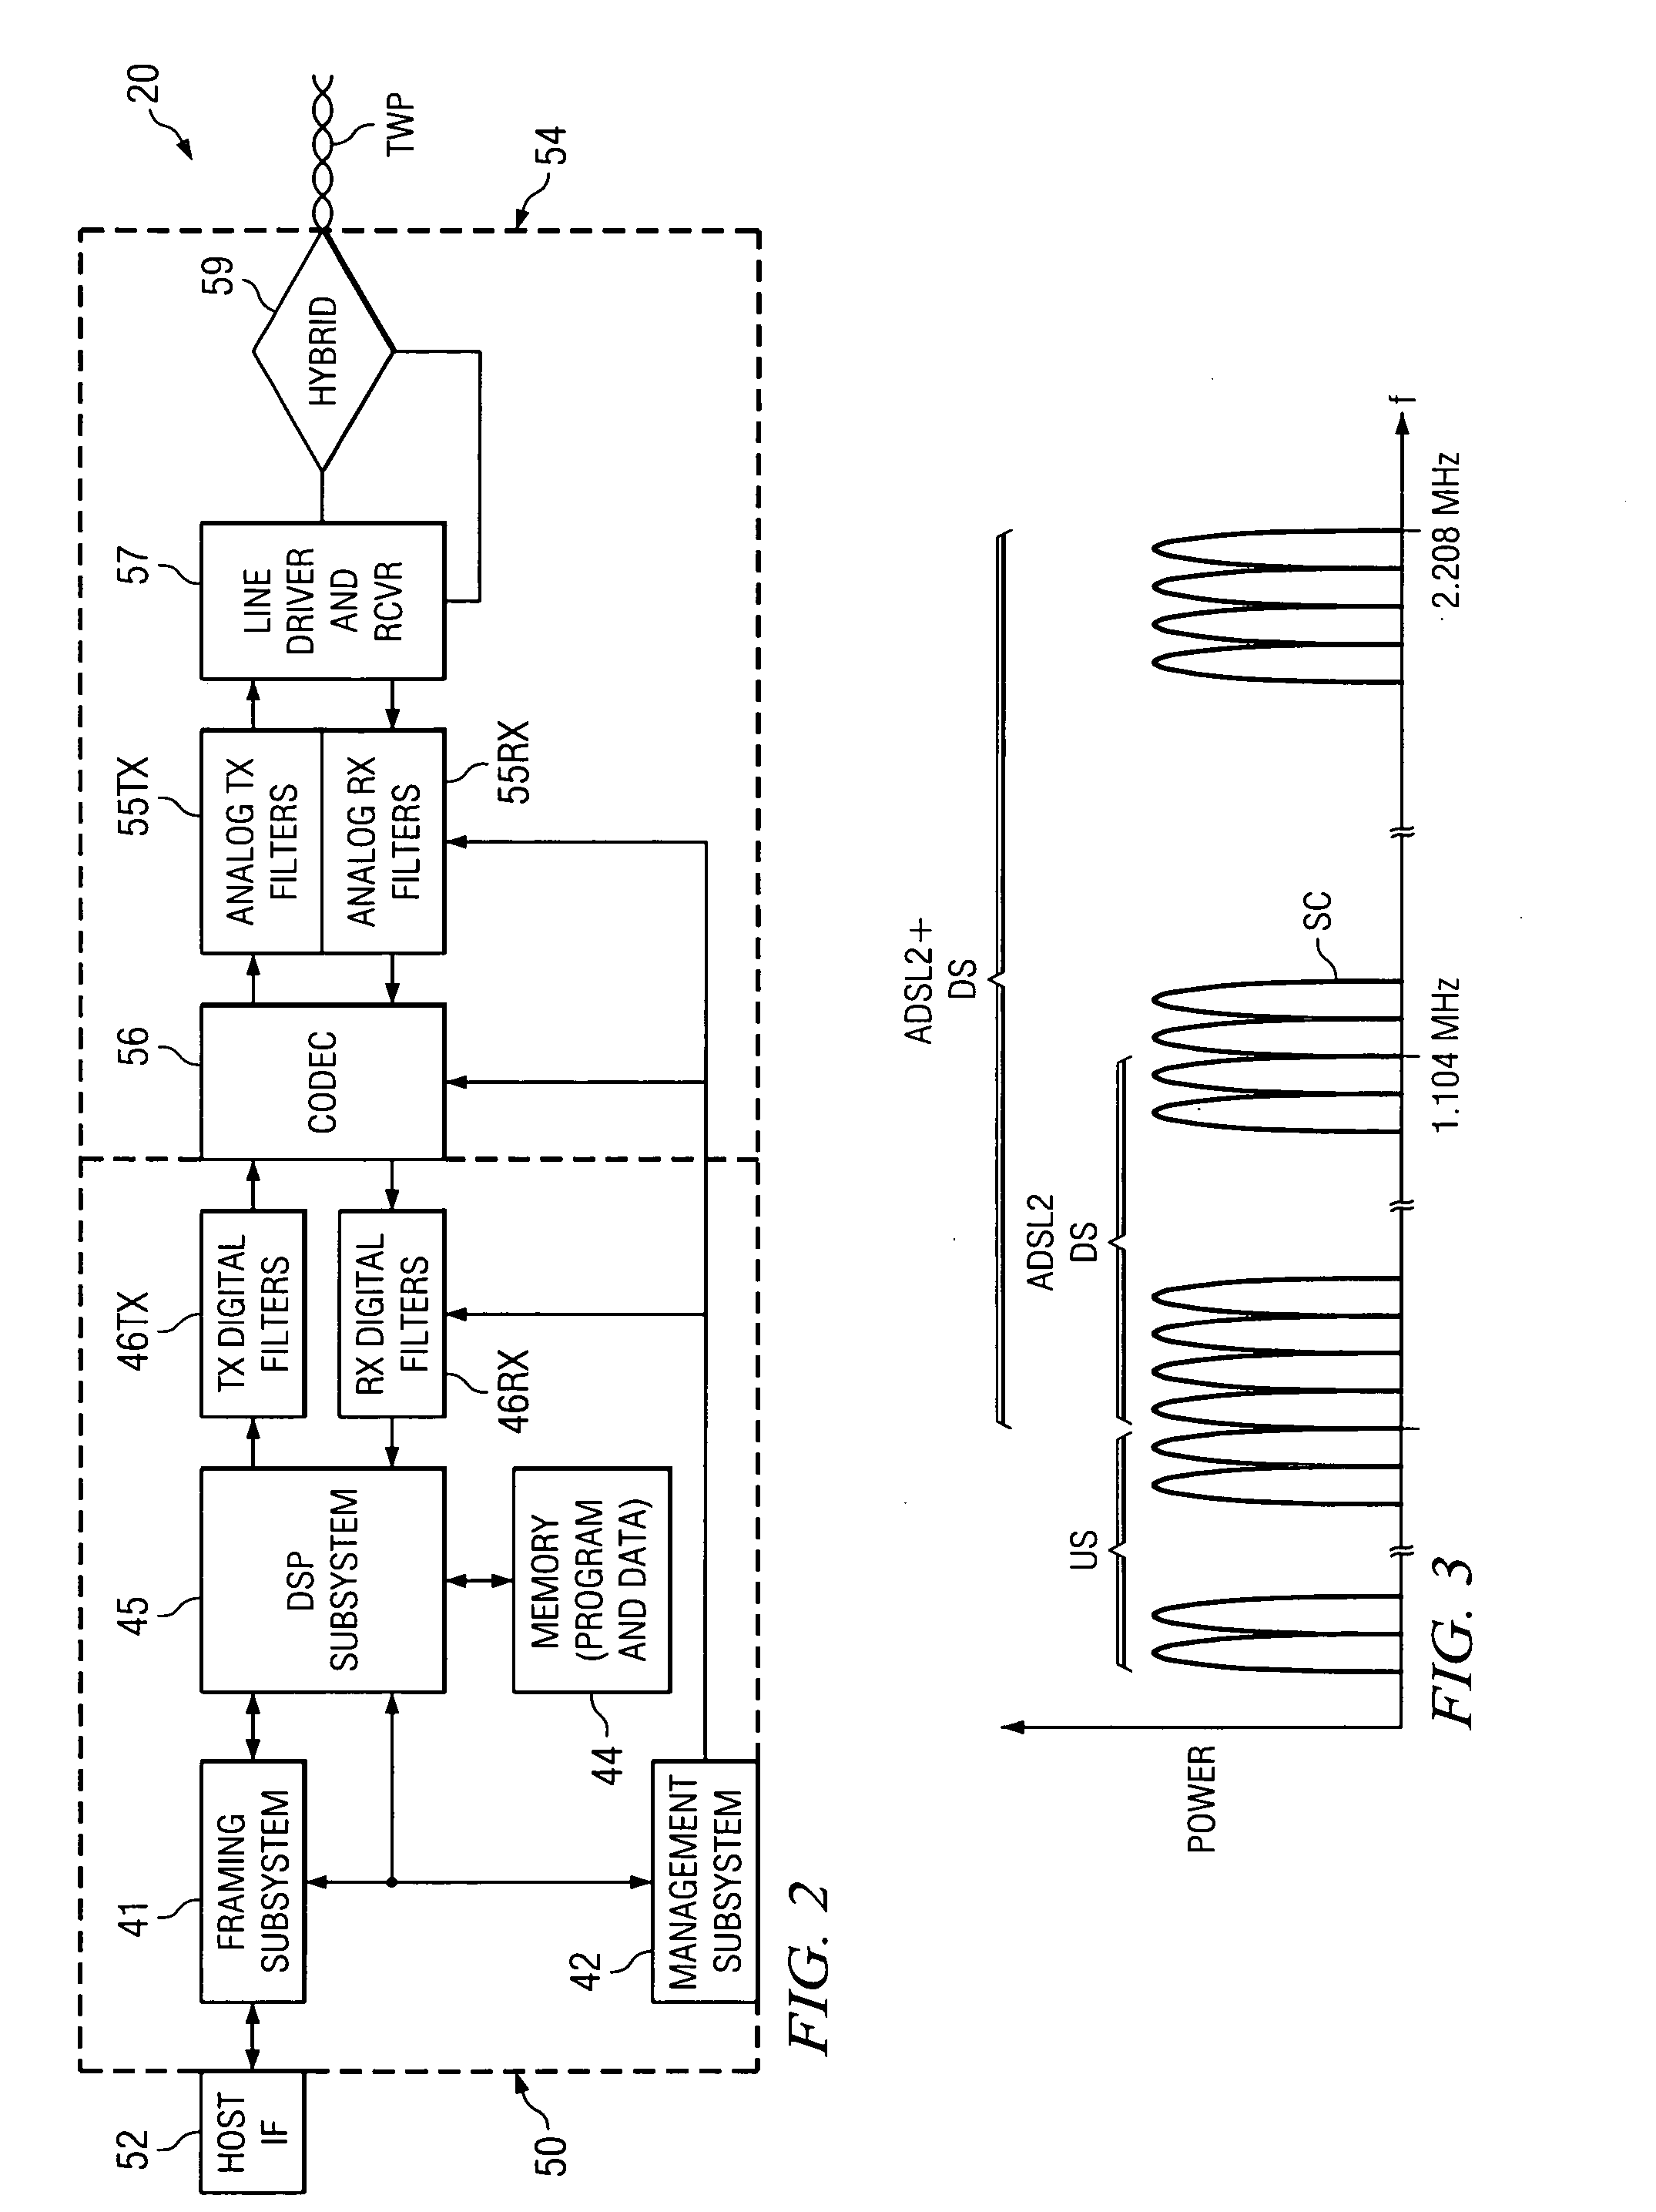 Receiver-side selection of DSL communications mode